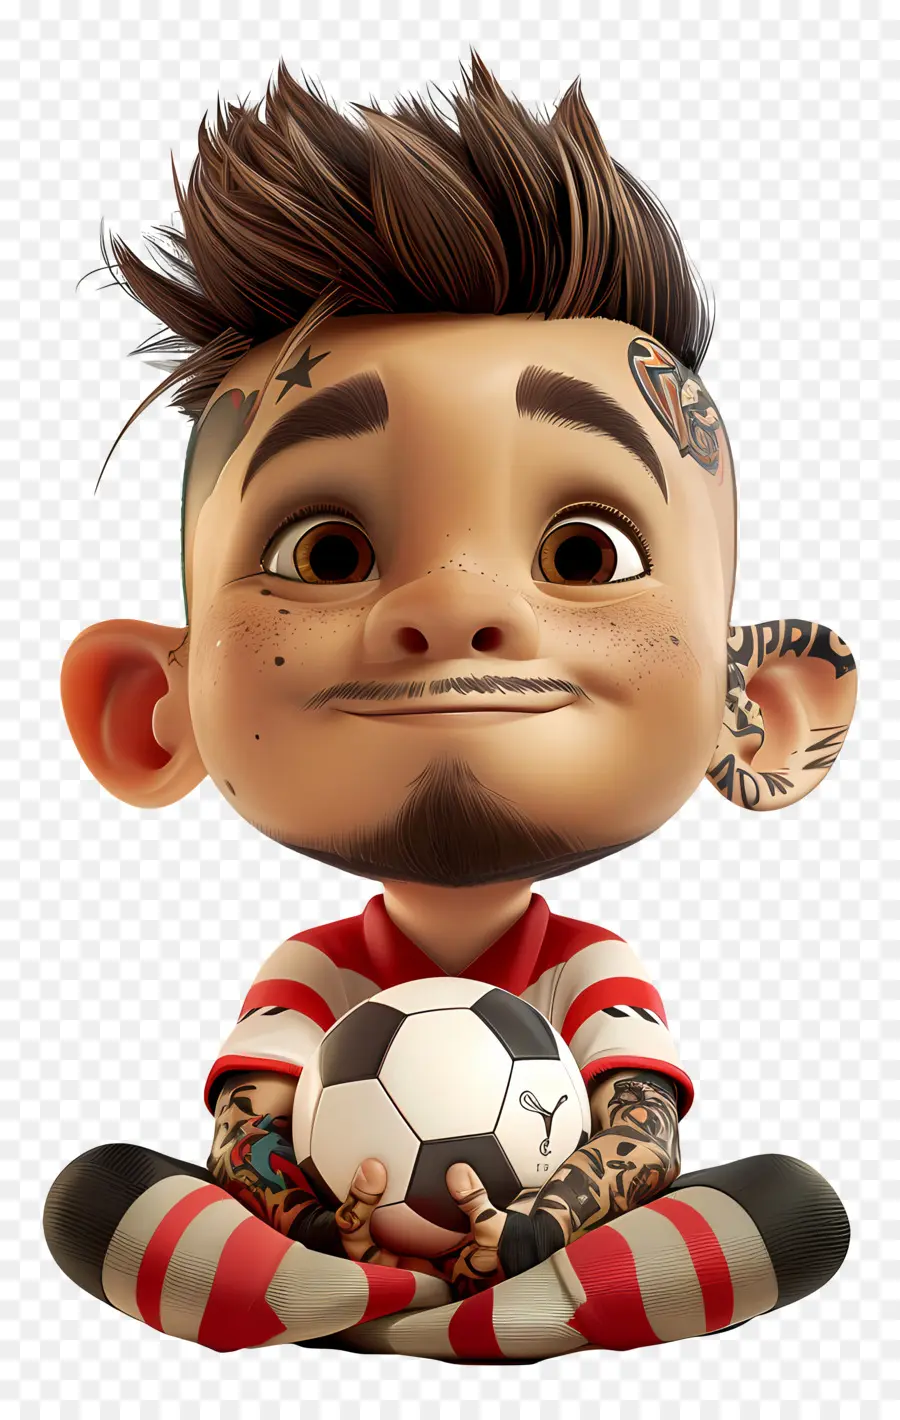 Paolo Guerrero，Soccer PNG